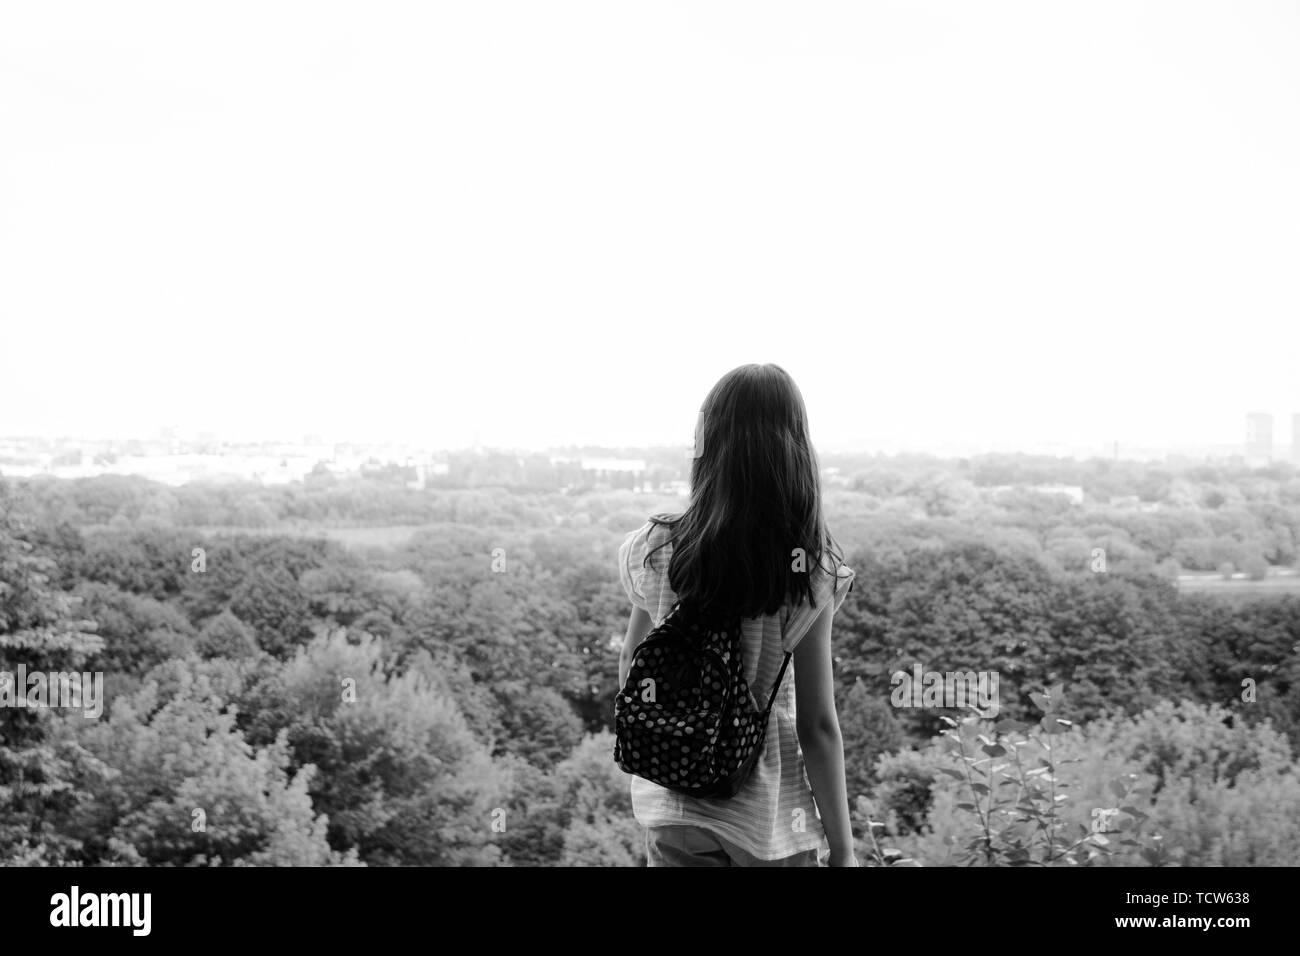 Young girl traveller with a small backpack, while enjoying the amazing views of the city, walking and exploring nature . Expectation Stock Photo